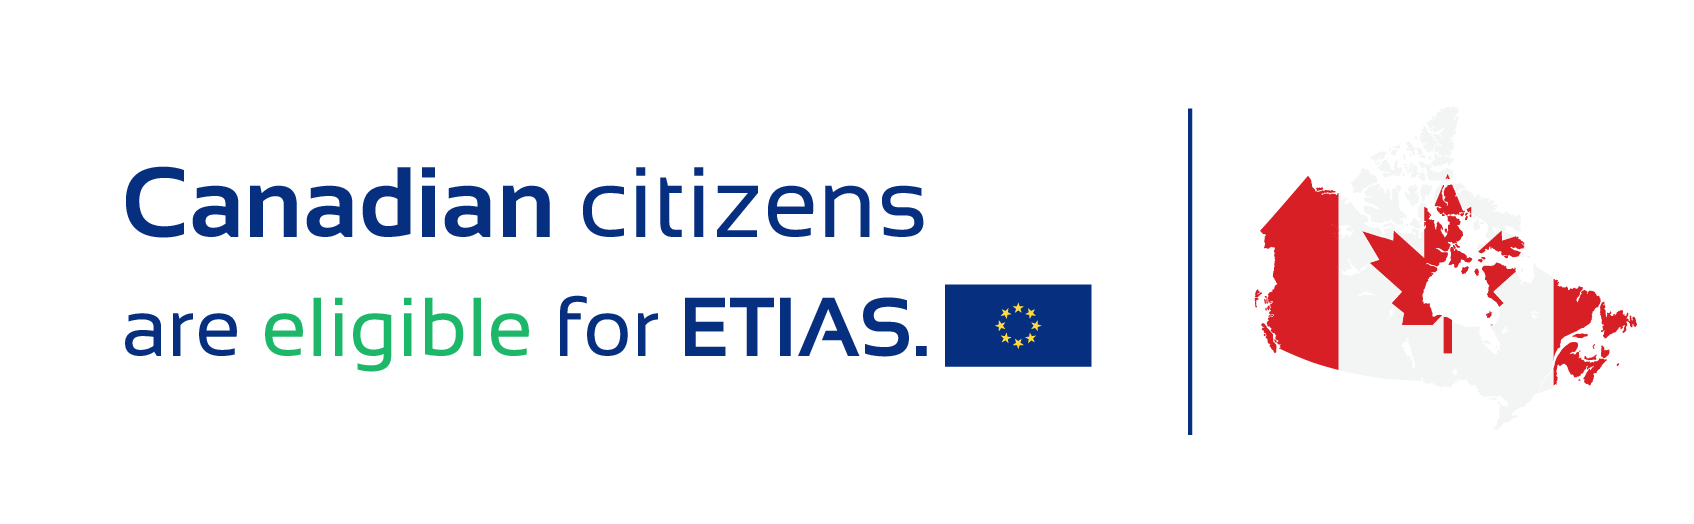 Canadian citizens are eligible for ETIAS